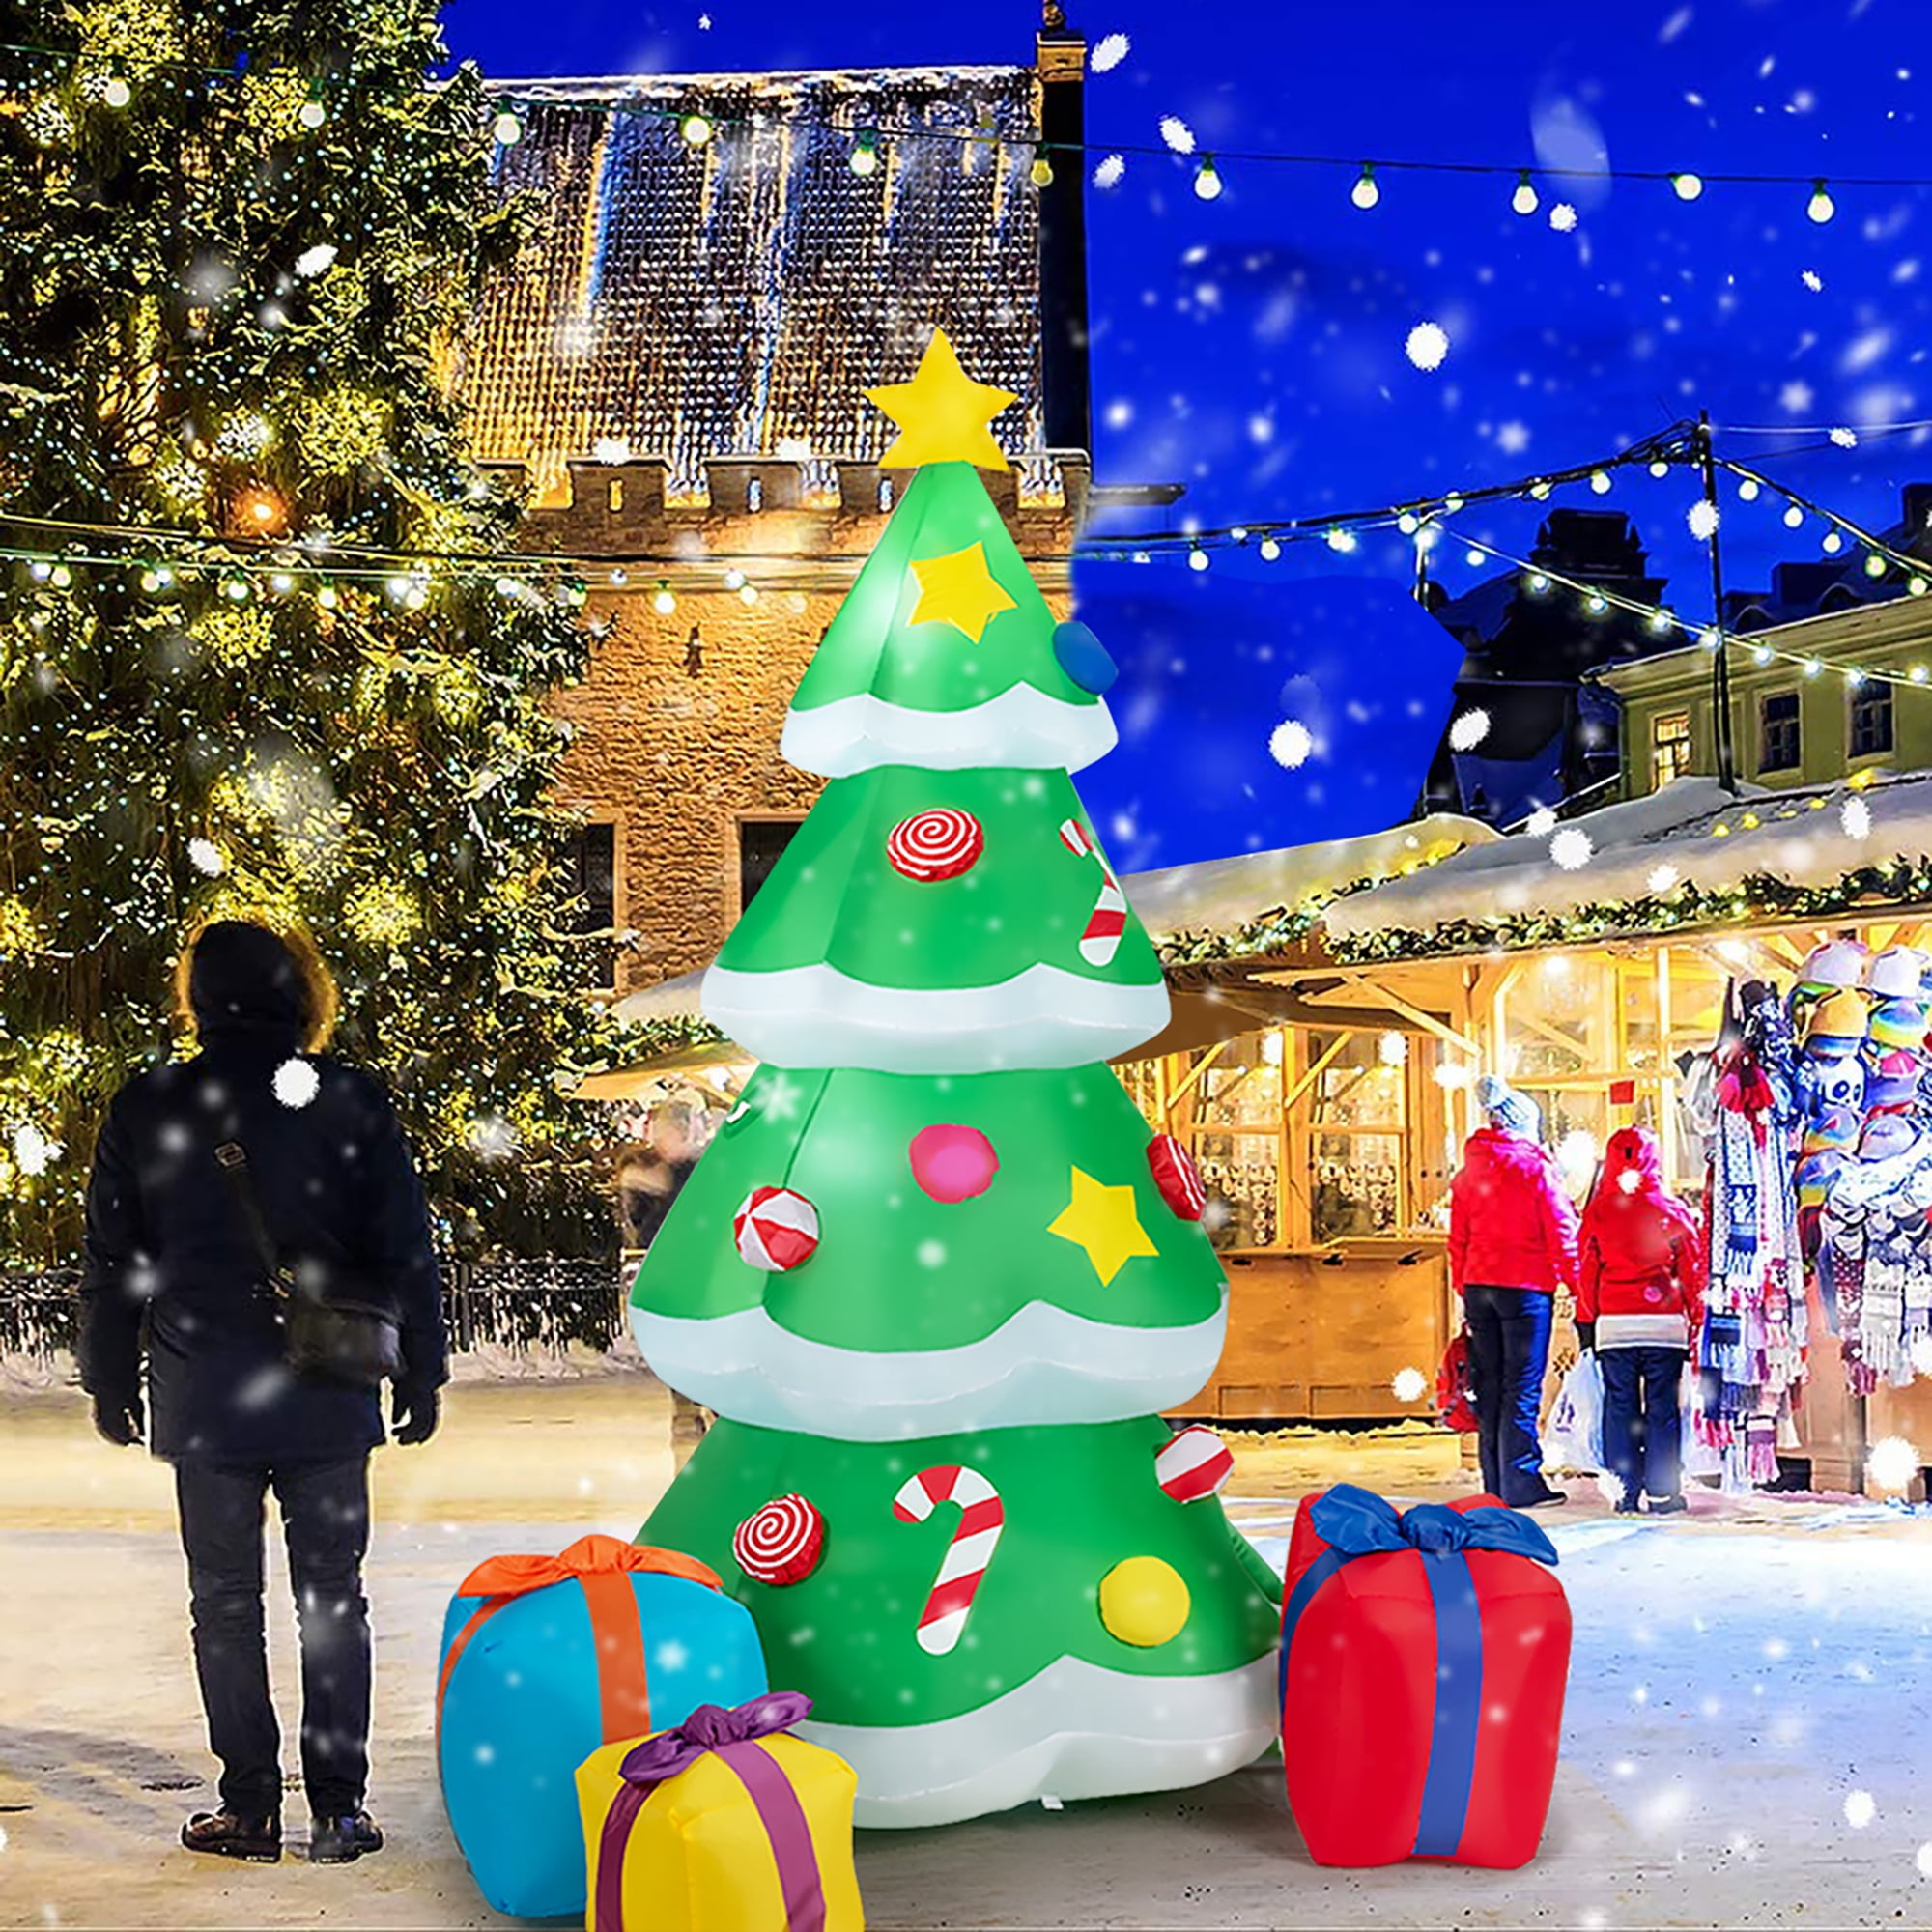 Indoor Outdoor Yard Garden Christmas Decoration Chrismtas Inflatables Outdoor Decoration 7 Feet LED Light Up Giant Christmas Tree Inflatable with 3 Gift Wrapped Boxes for Blow Up Yard Decoration 